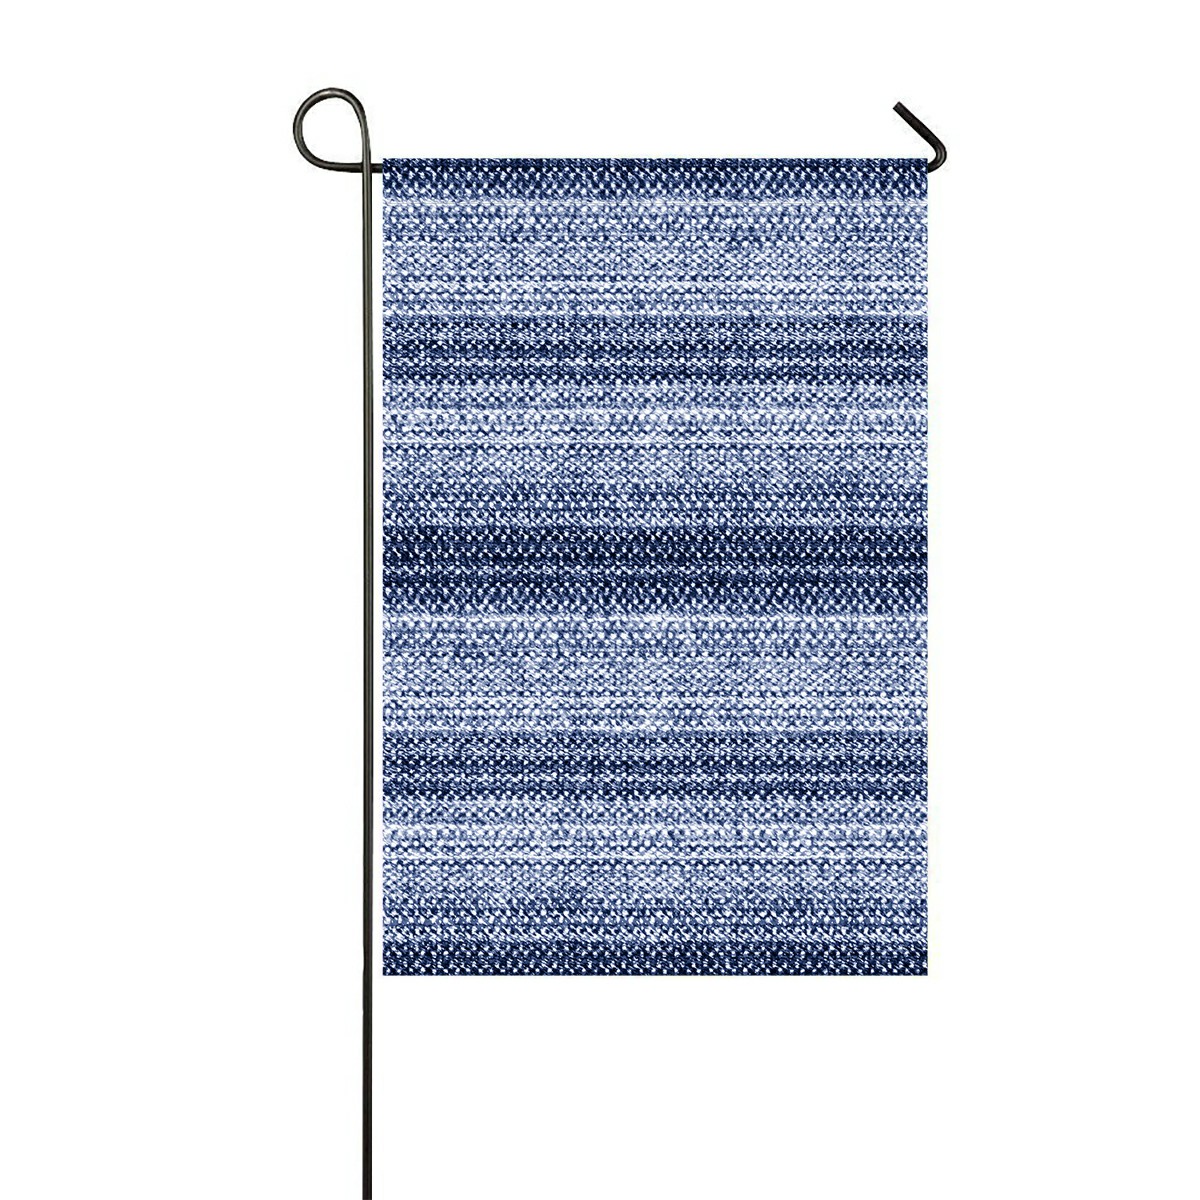 ABPHQTO Brushed Striped Motif Tweed Flecks Home Outdoor Garden Flag House Banner Size 12x18 Inch - image 1 of 1